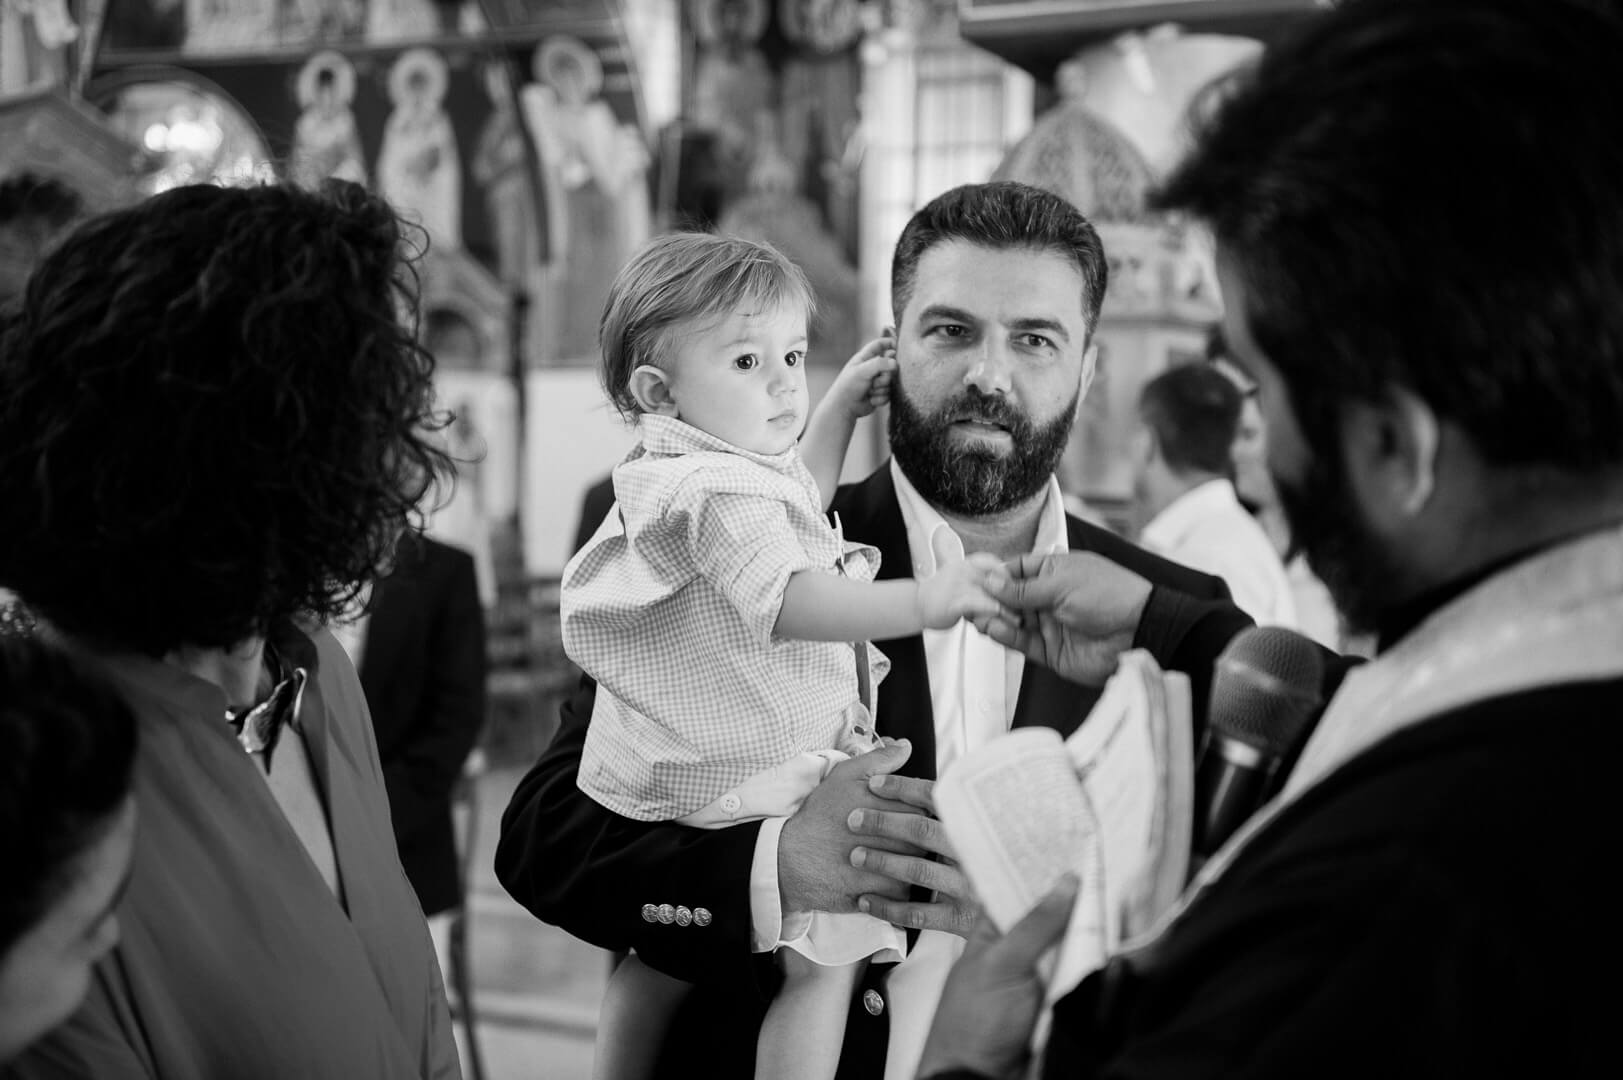 Tender moment during blessings: father holds child close as sacred words are spoken during the christening.